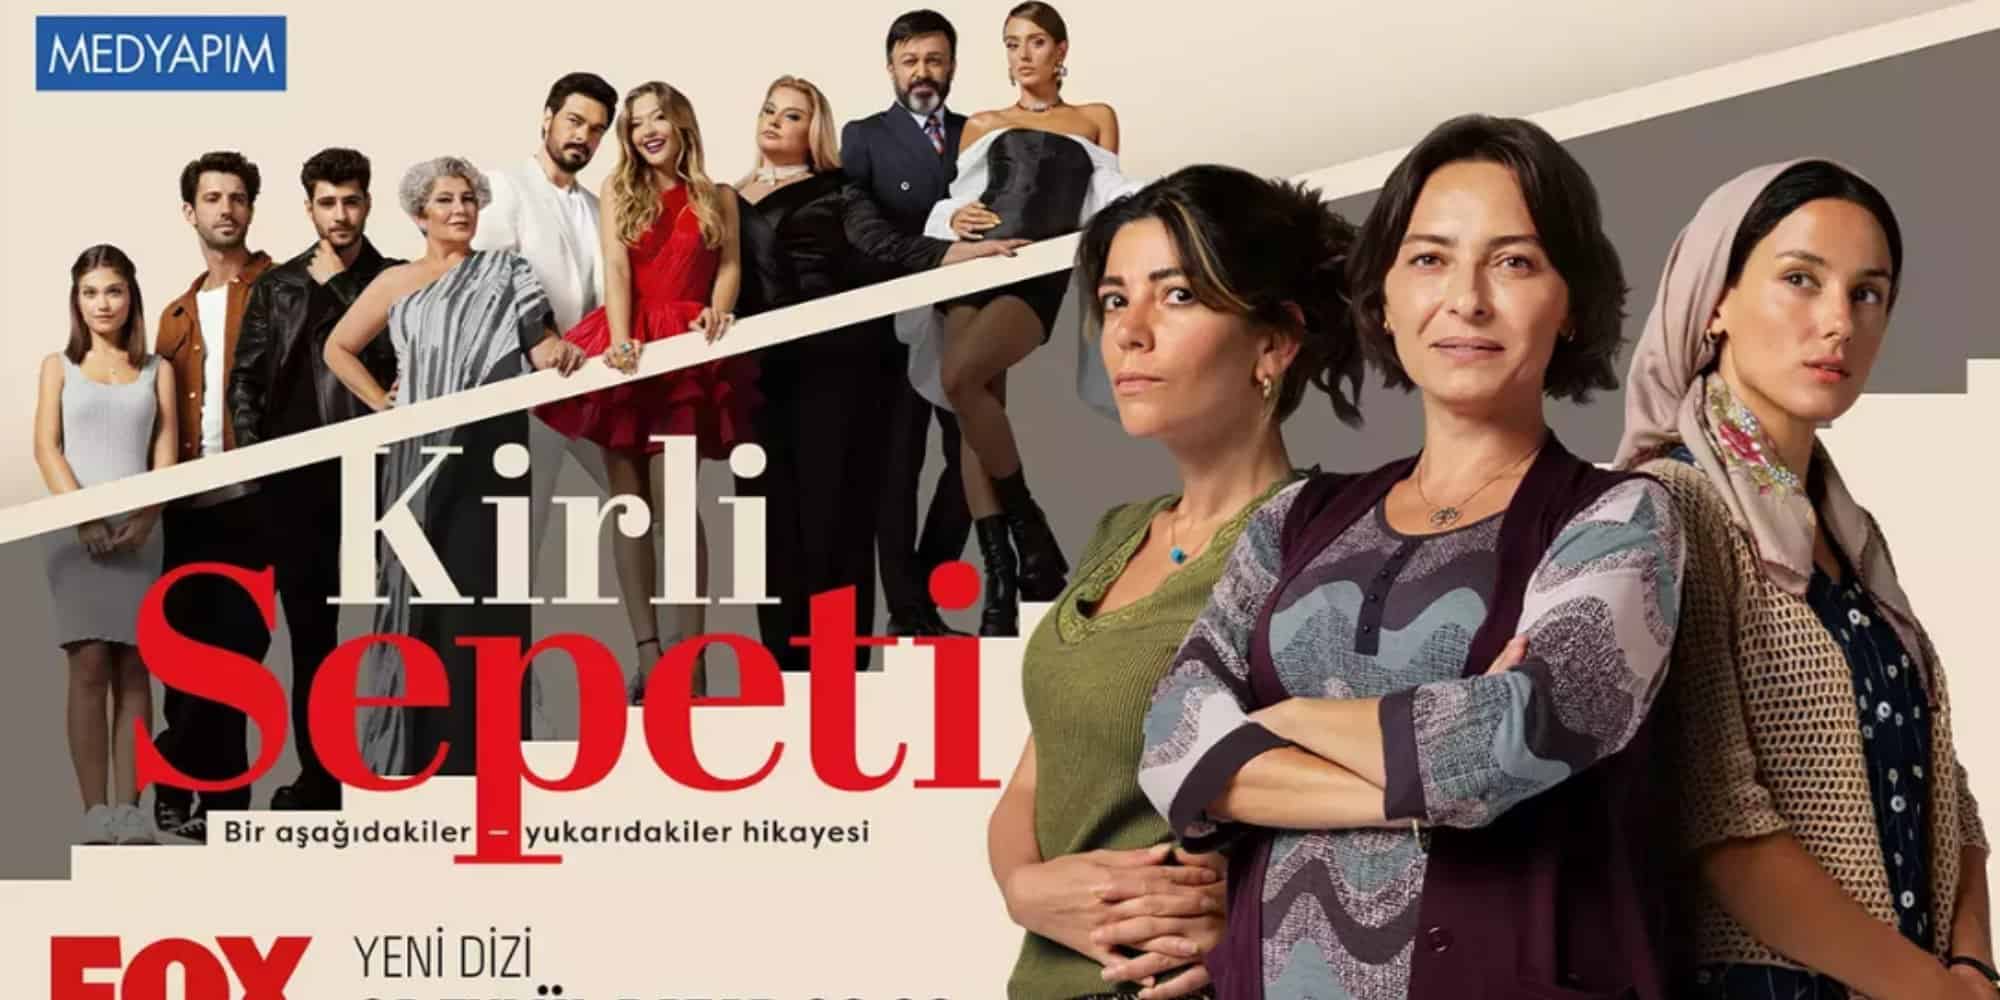 How To Watch Kirli Sepeti Episodes?